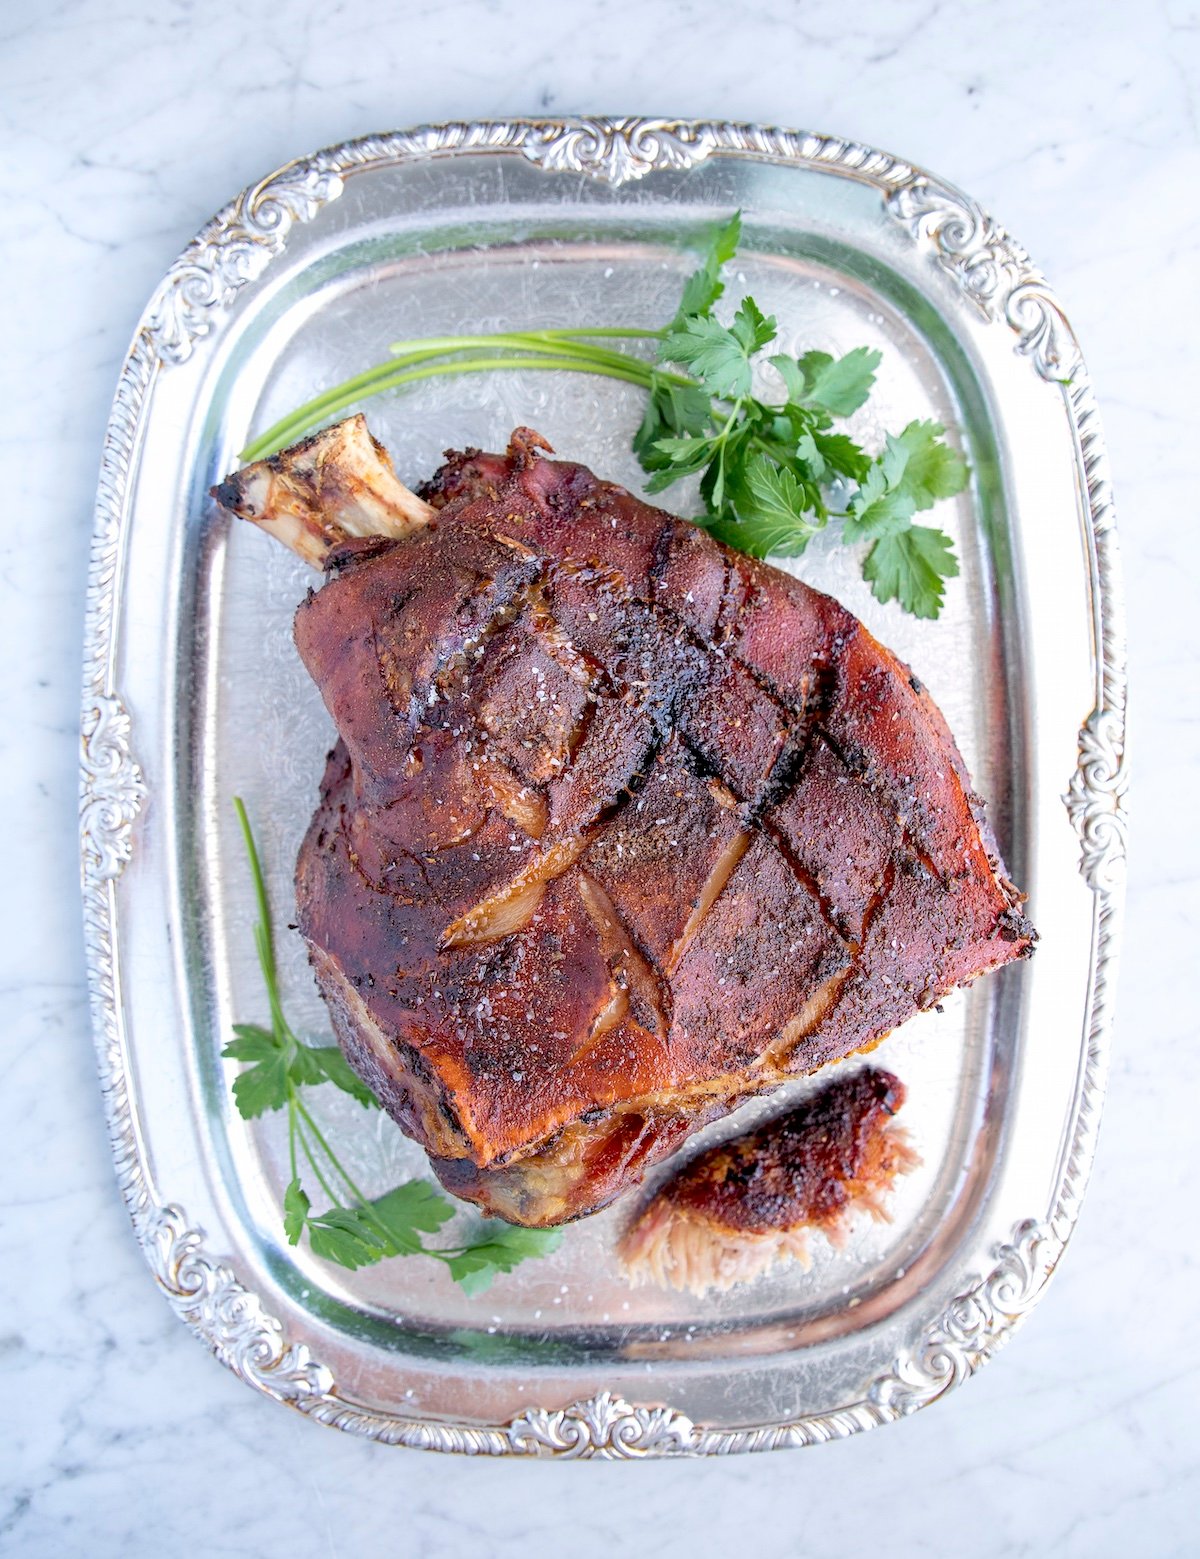 easy roasted pork shoulder with the bone in on a silver platter garnish dwith cilantro